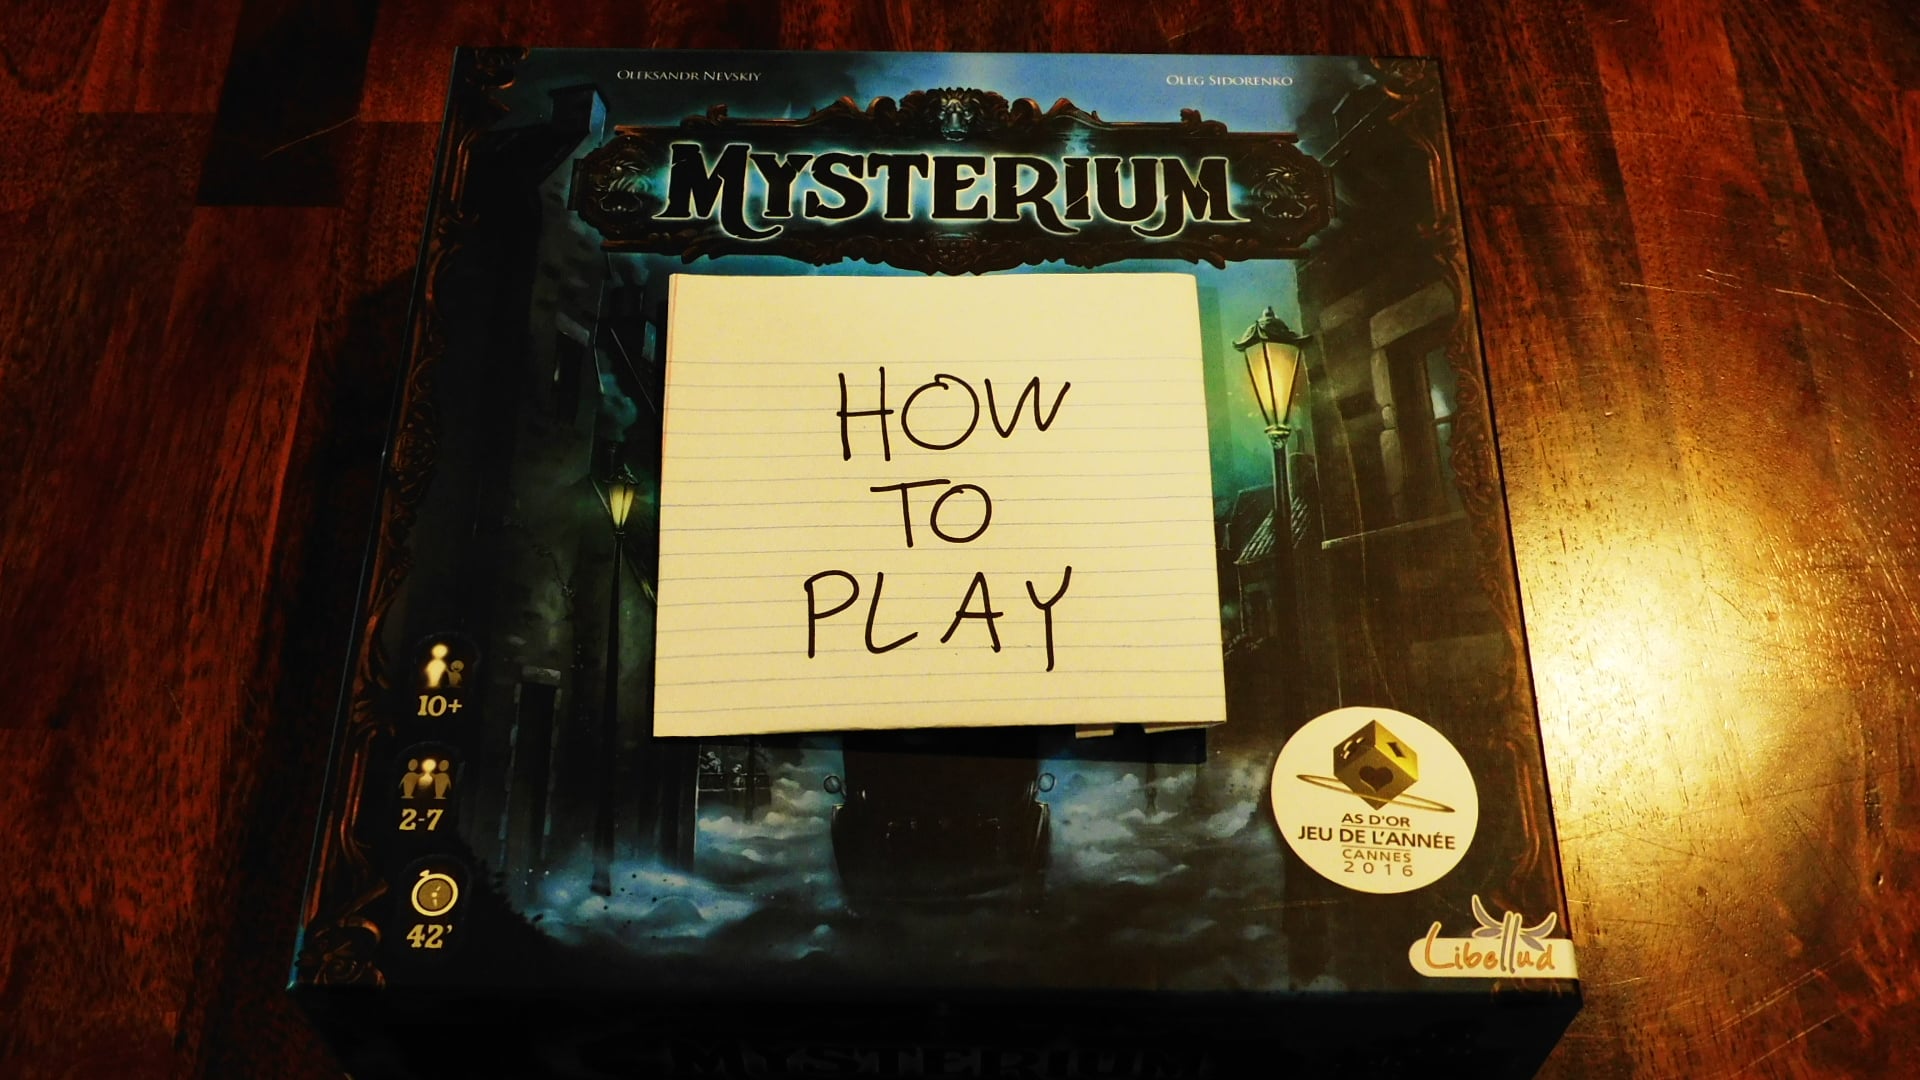 The Mysterium game box with "How To Play" written on a piece of paper on it.